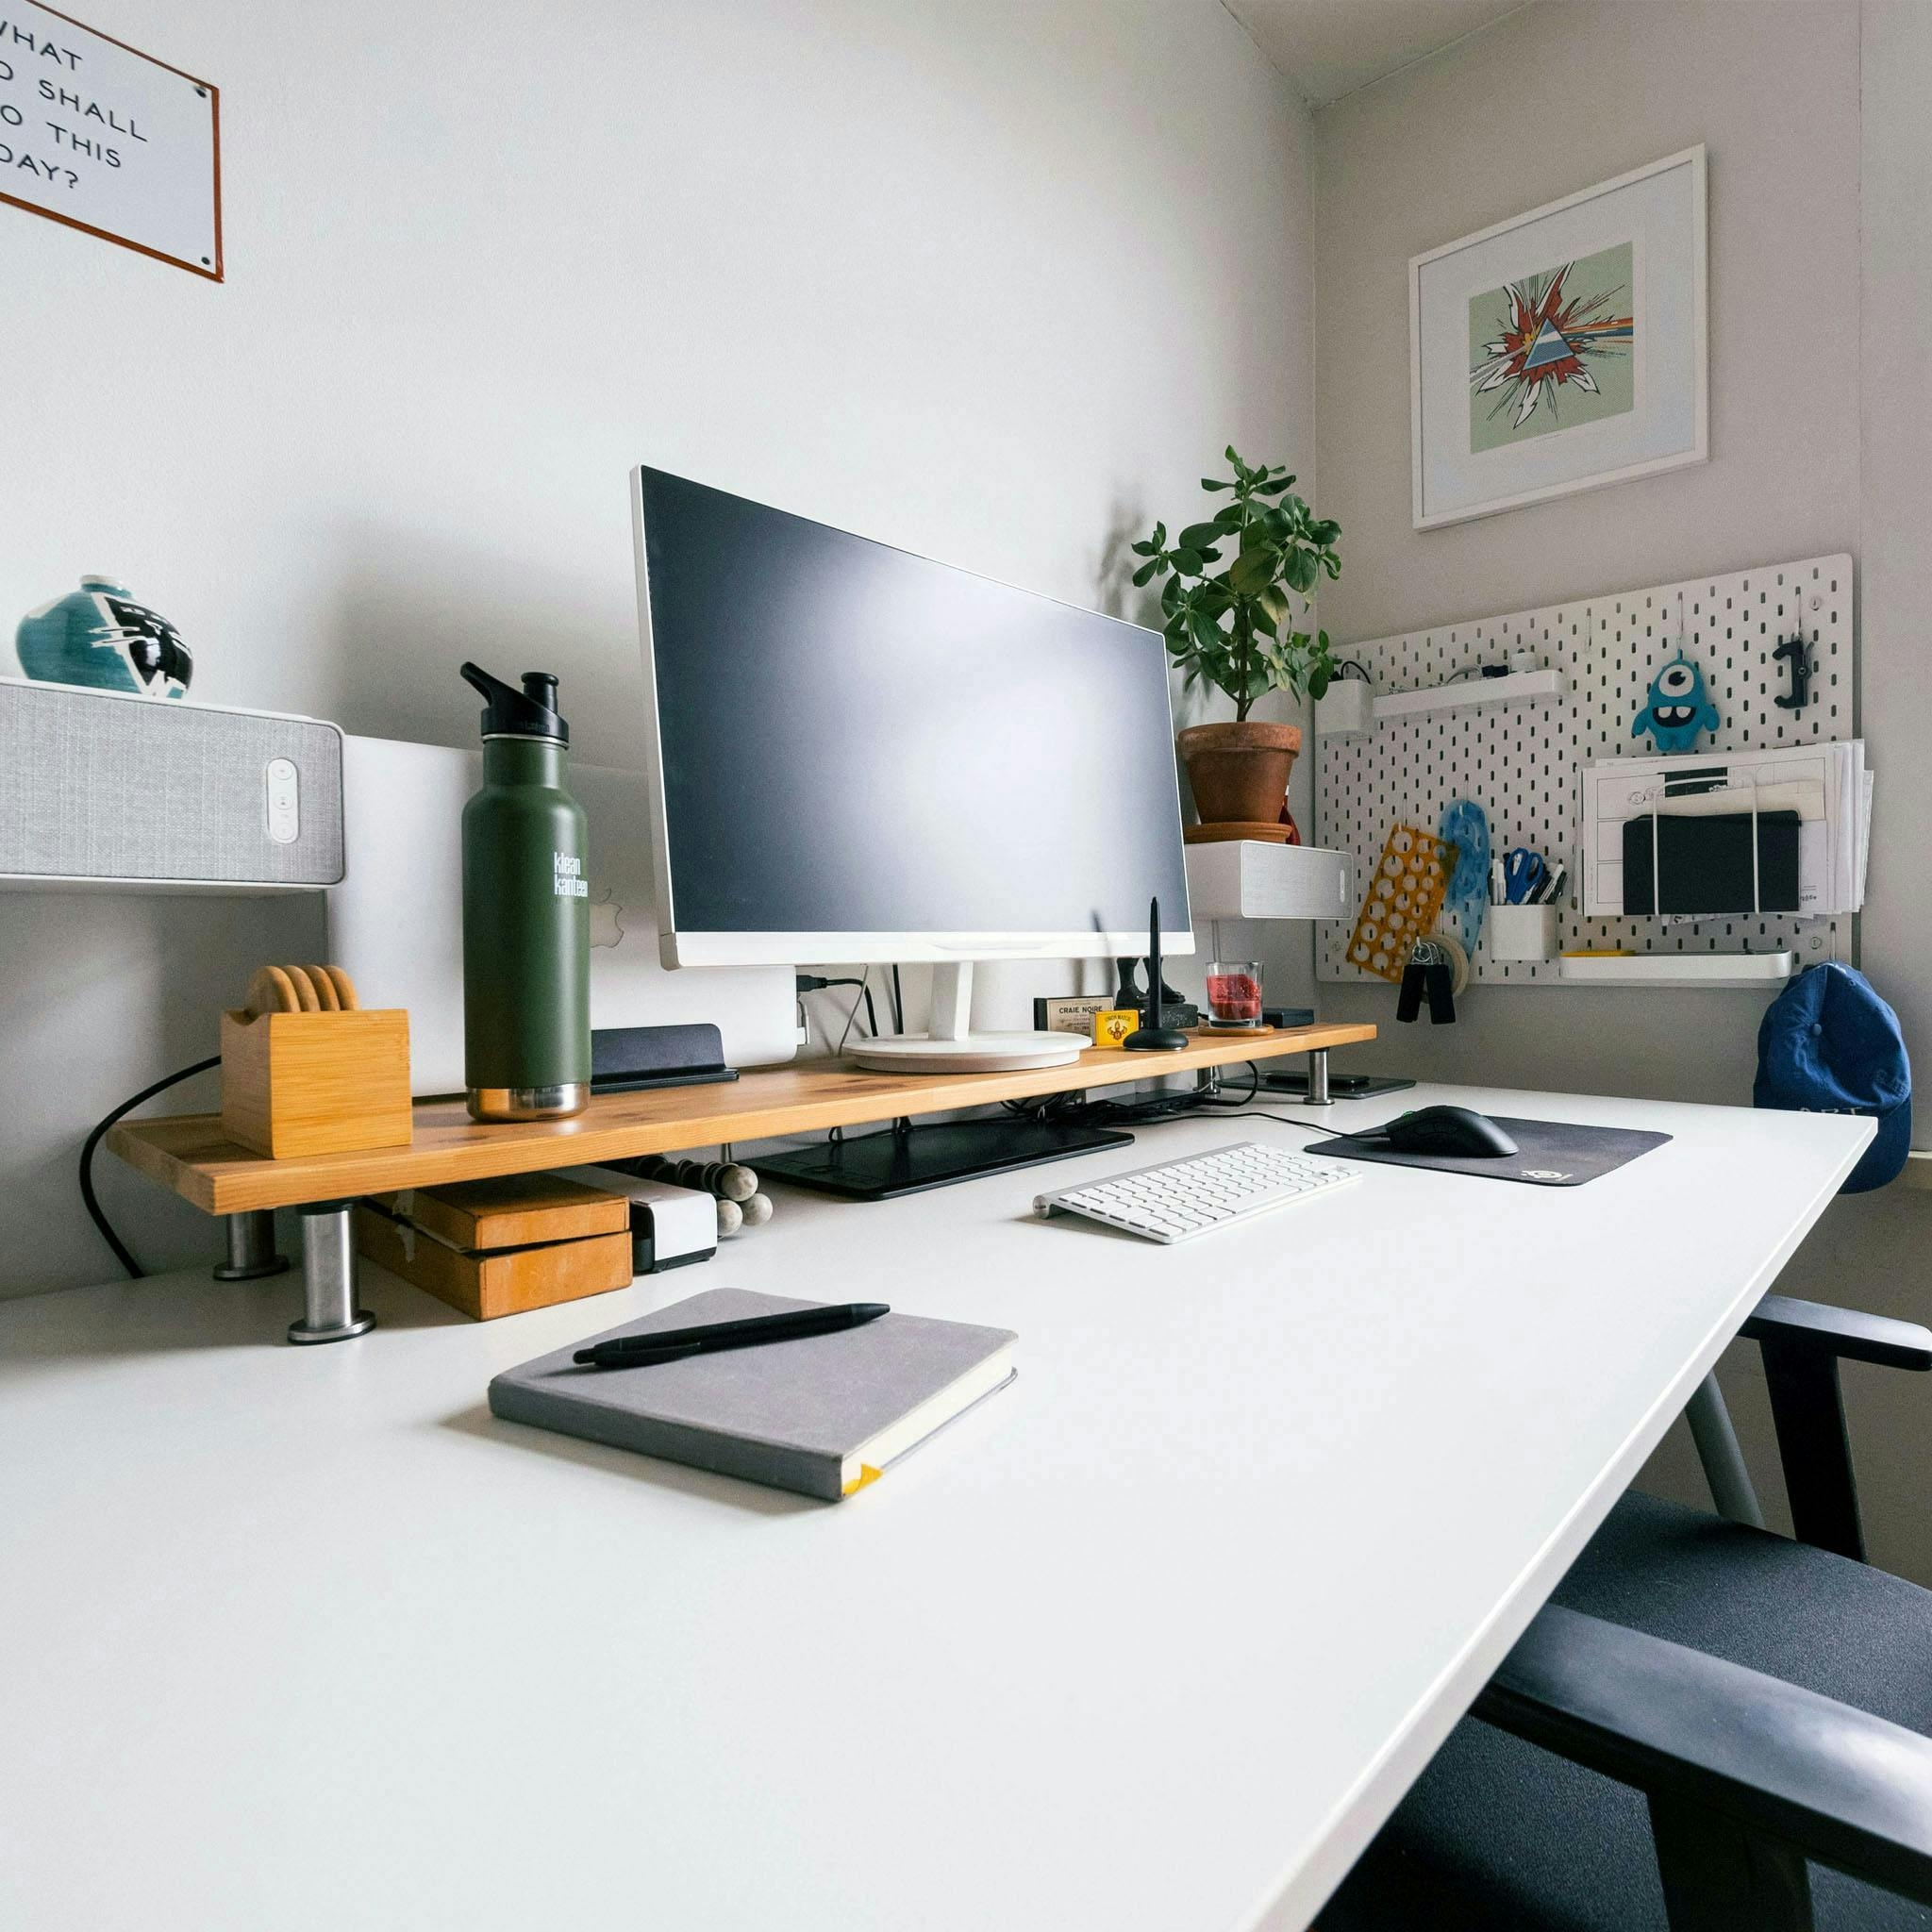 A white gaming desk combined with white hardware, also makes a great home office | Credit: Arthur Lambillotte / Unsplash